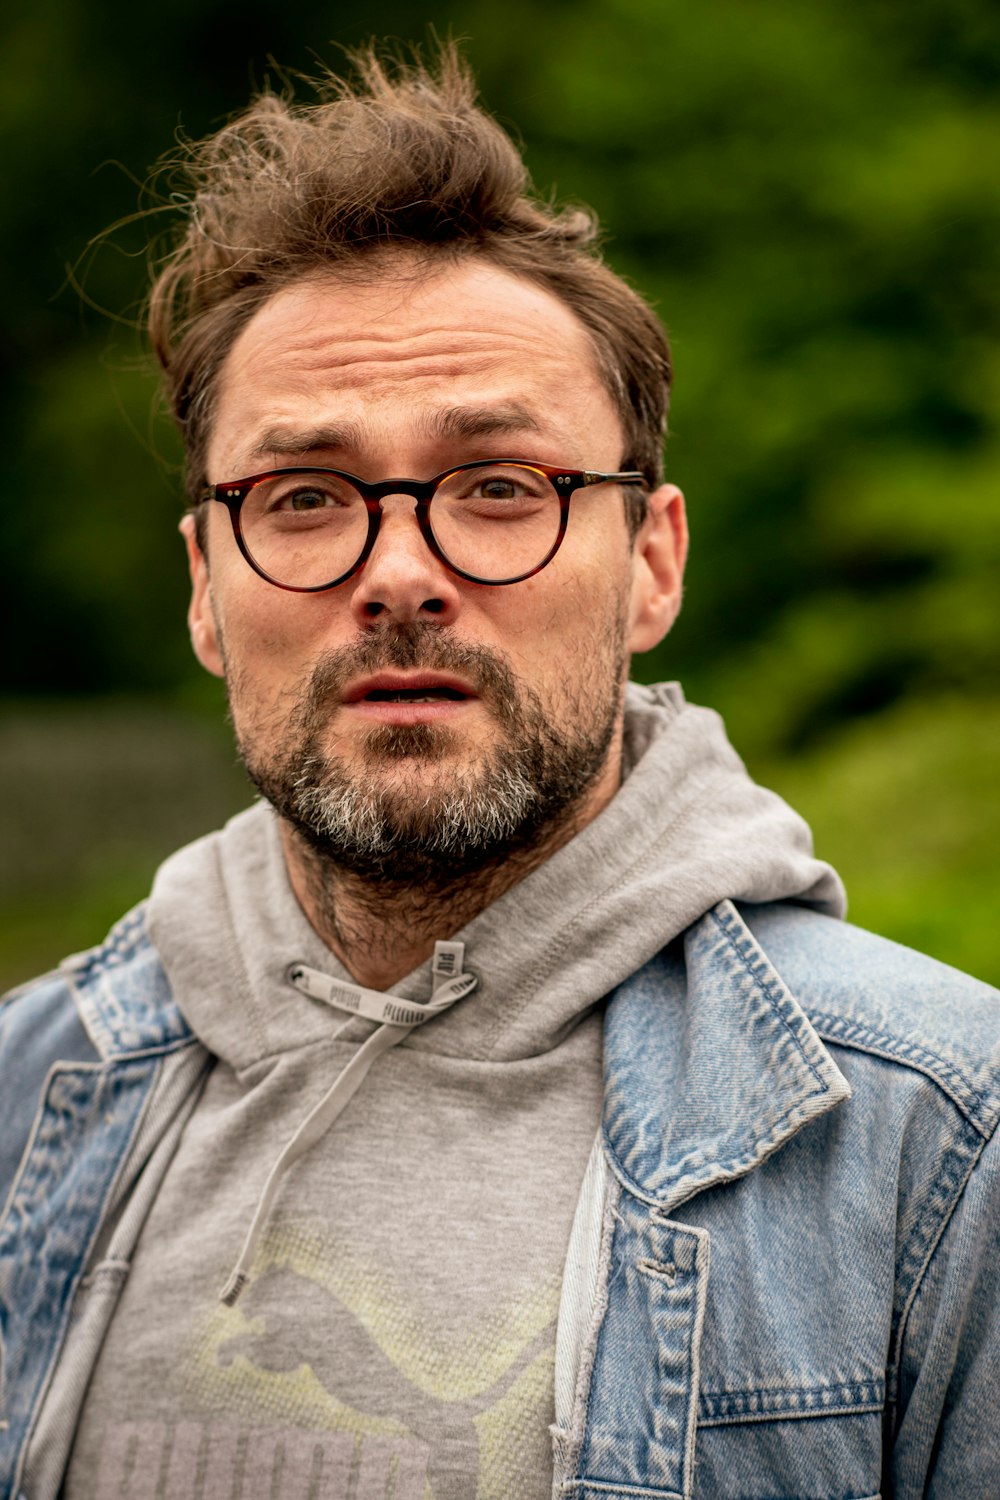 a man wearing glasses and a denim jacket